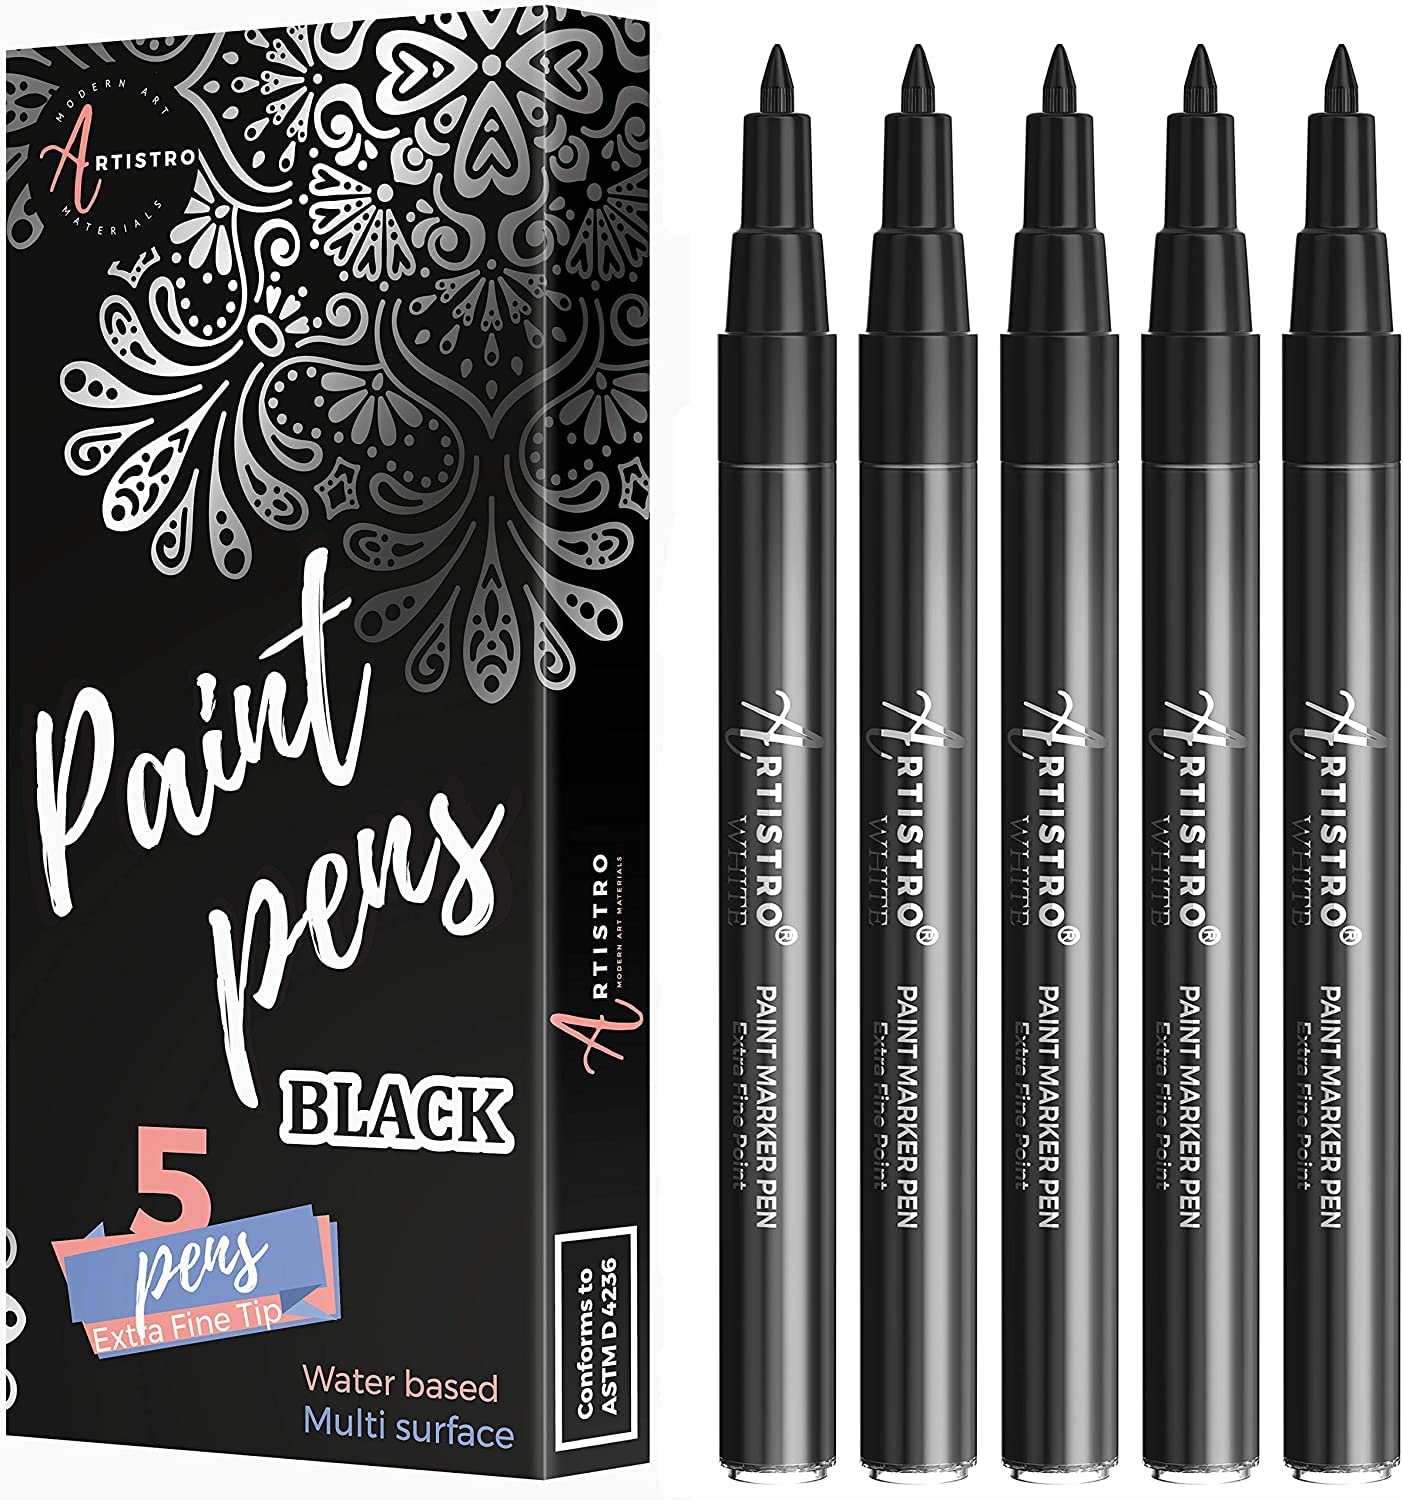  ARTISTRO White Paint Pen for Rock Painting, Stone, Ceramic,  Glass, Wood, Tire, Fabric, Metal, Canvas. Set of 5 Acrylic Paint White  Marker Water-based Extra-fine Tip : Arts, Crafts & Sewing